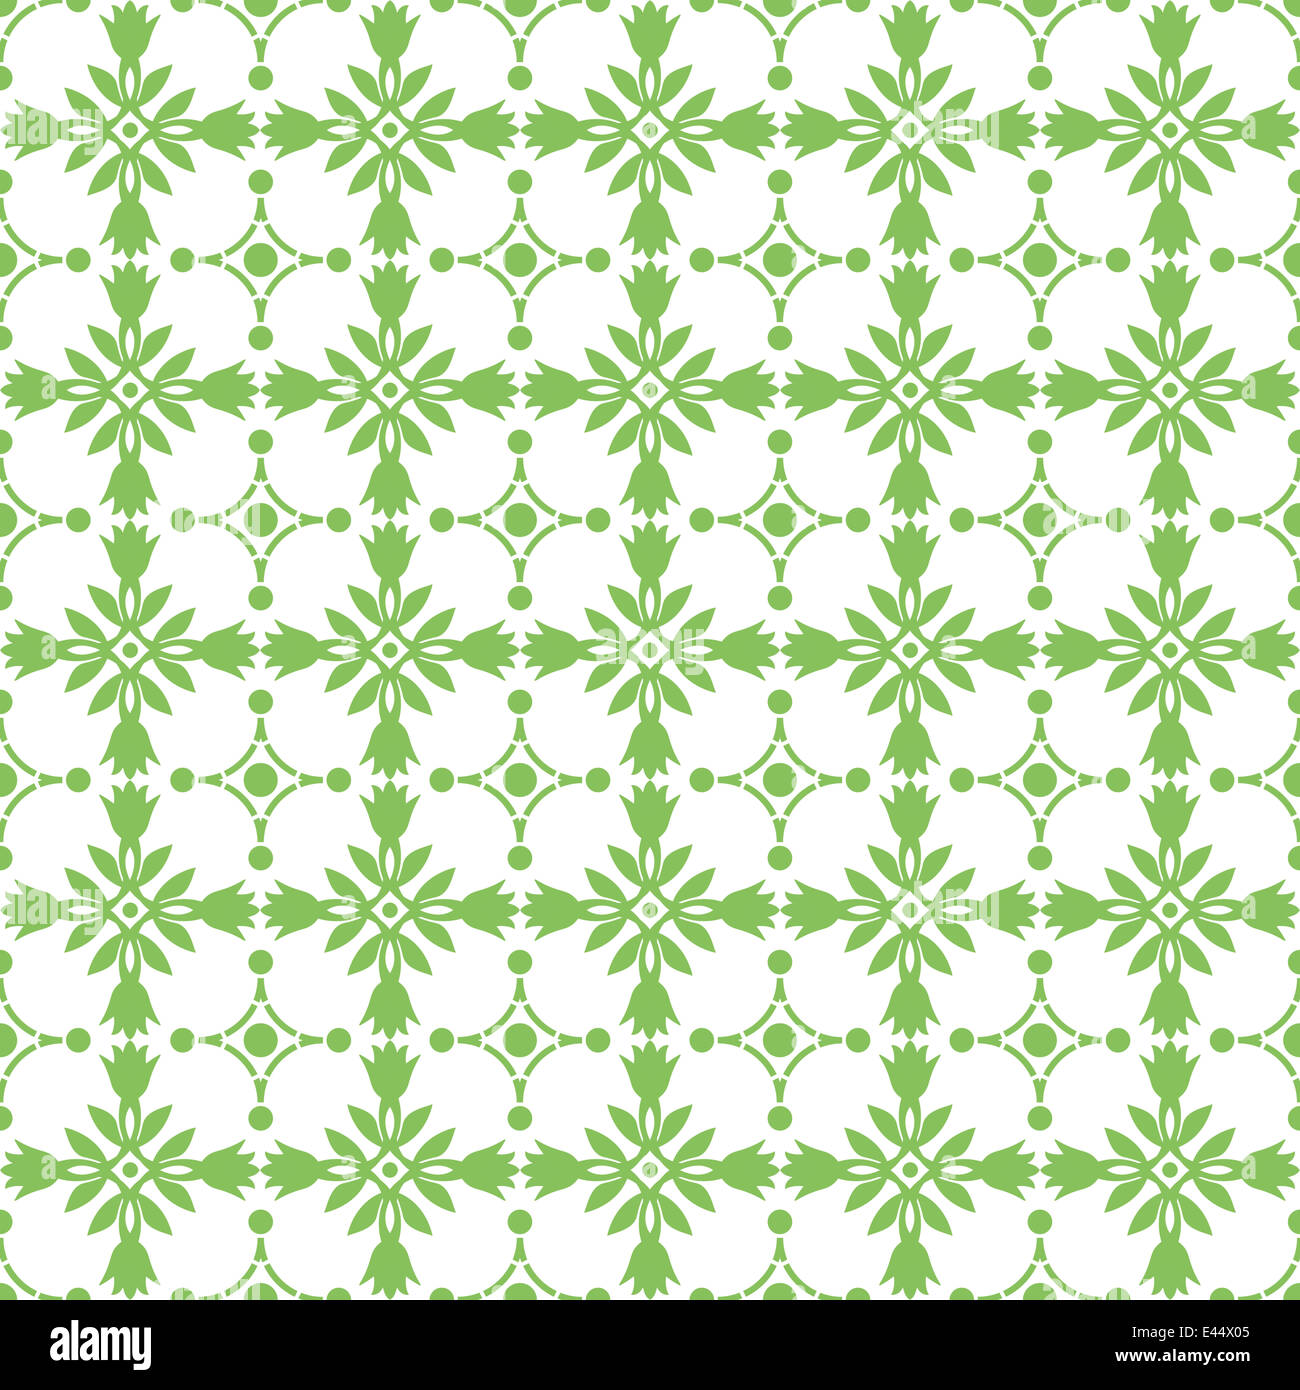 Seamless floral pattern Stock Photo